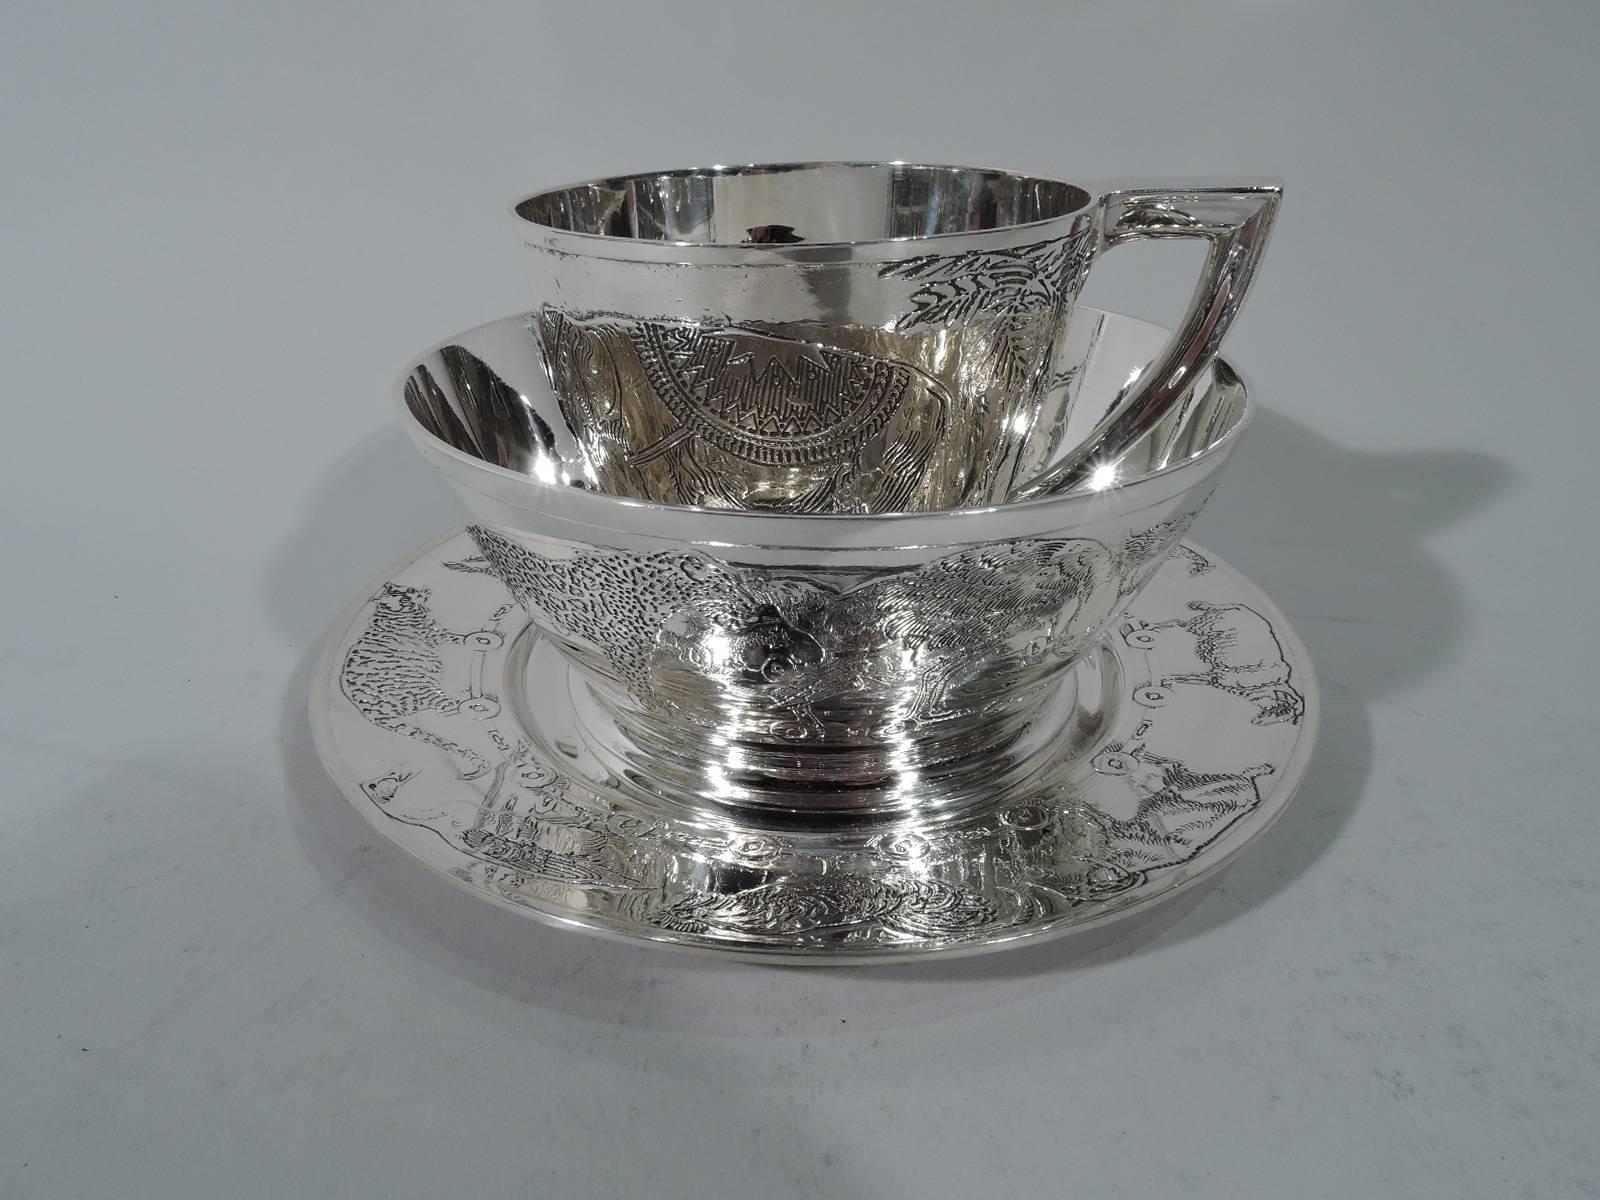 Art Deco three-piece sterling silver baby set. Made by Kerr in Newark. This set comprises cup, bowl, and plate. Plate has well. Cup and bowl are gently curved and tapering with raised foot. Modern forms acid-etched with animal parade: Exotic